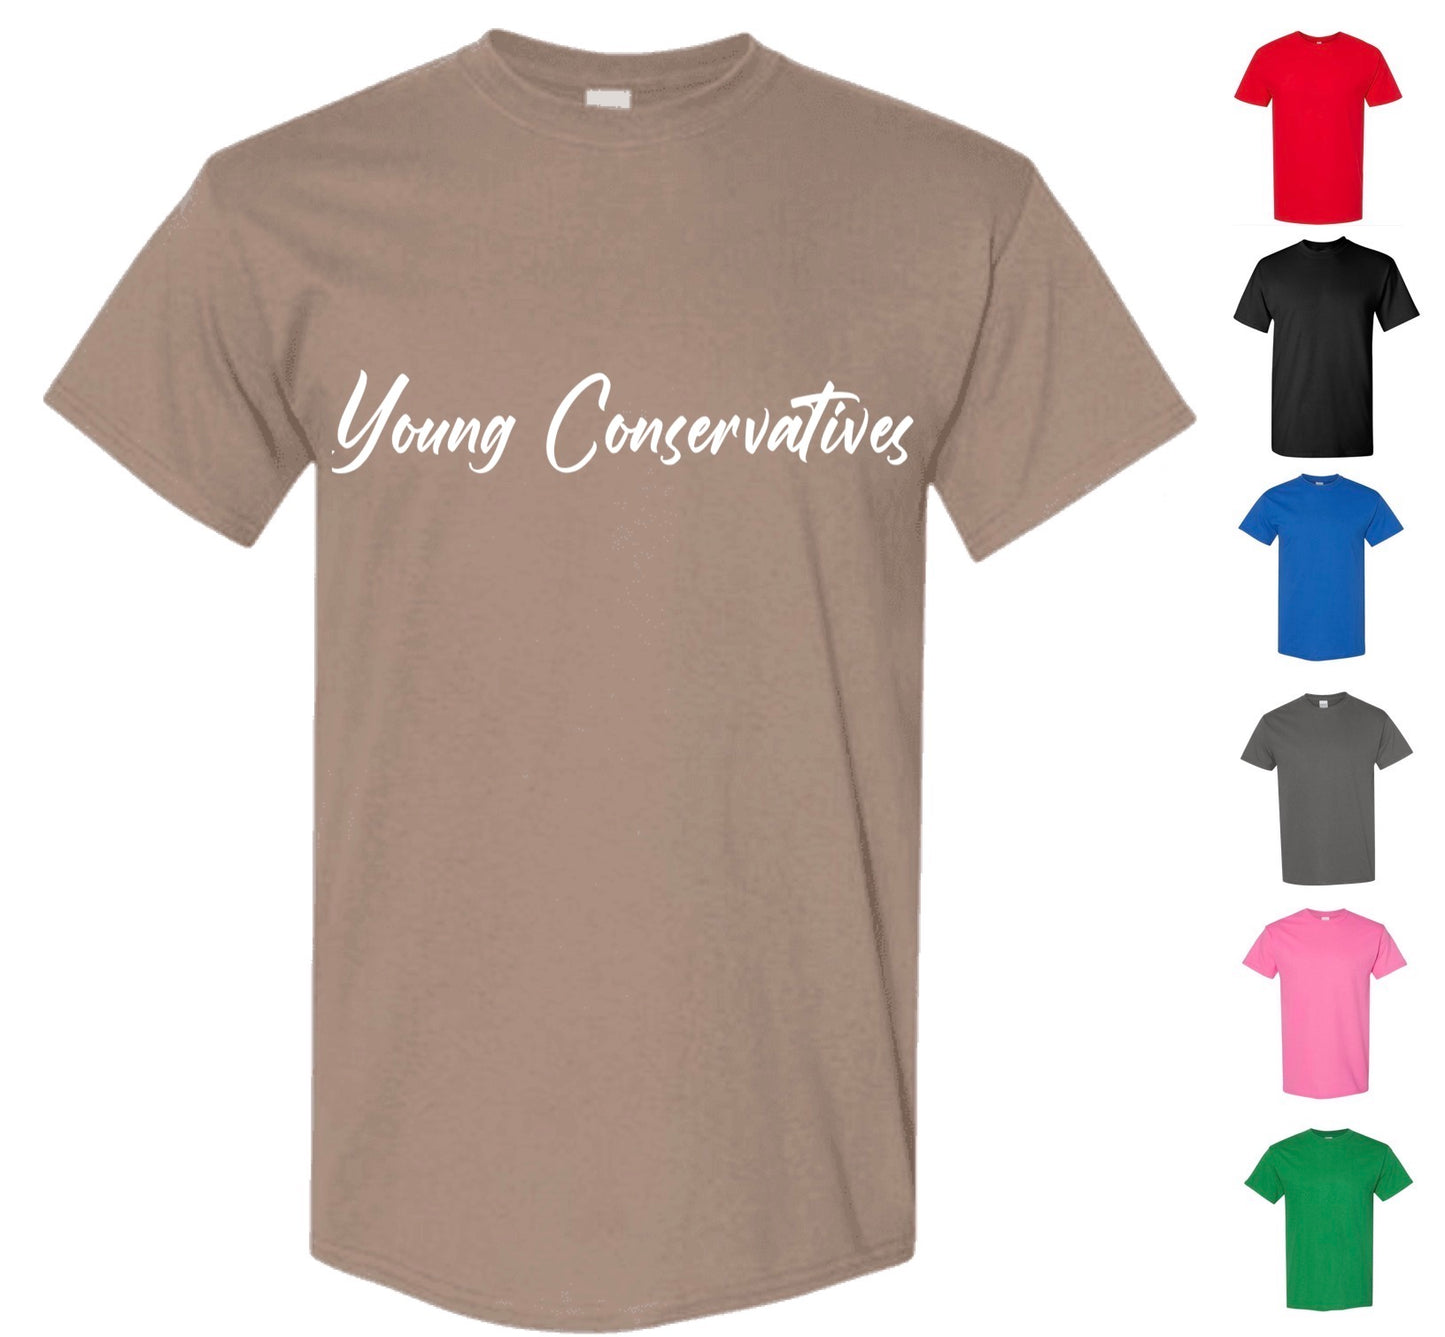 Young Conservatives T-shirt (FREE Shipping)